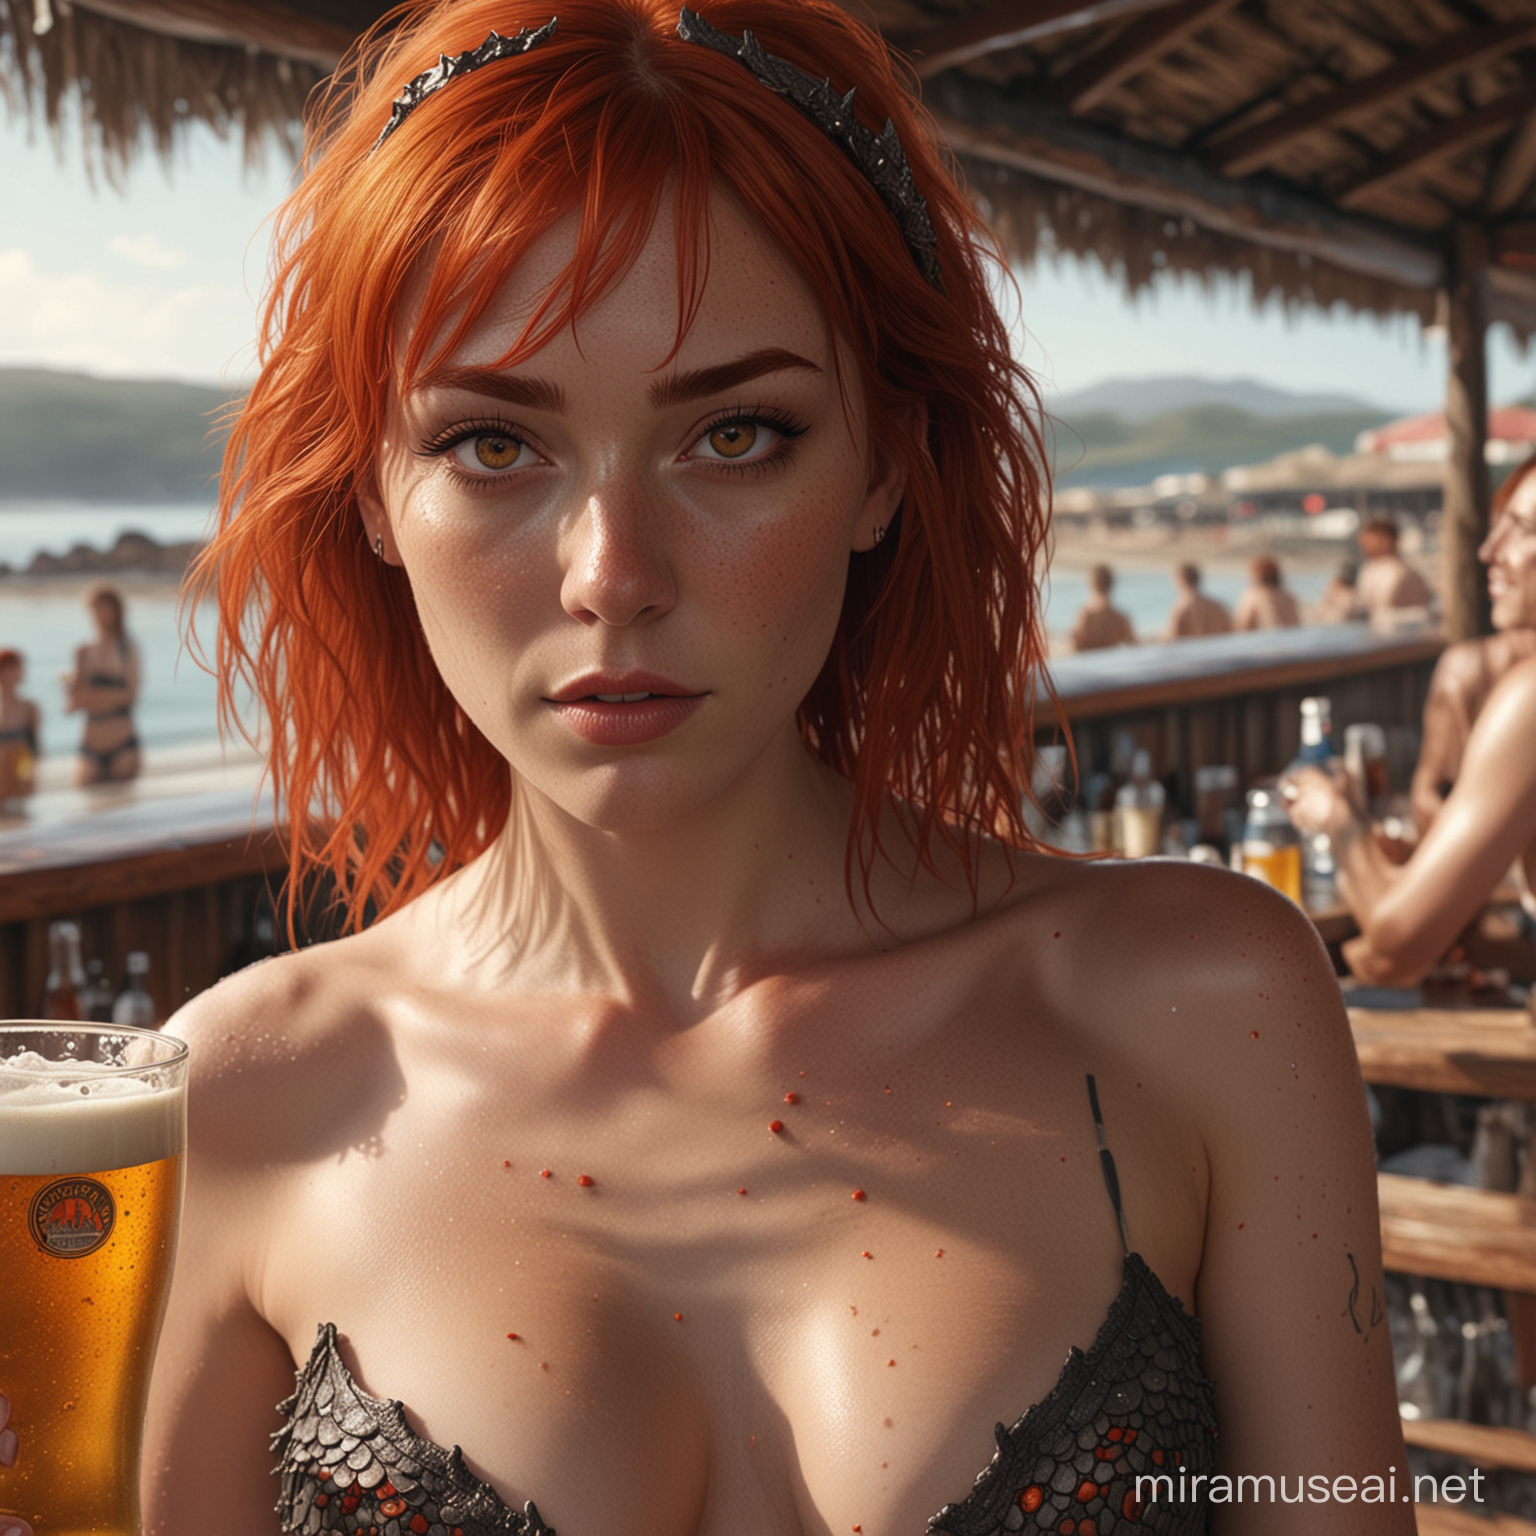 Fiery RedHaired Woman with Dragon Scales Enjoying a Beer at Beach Bar